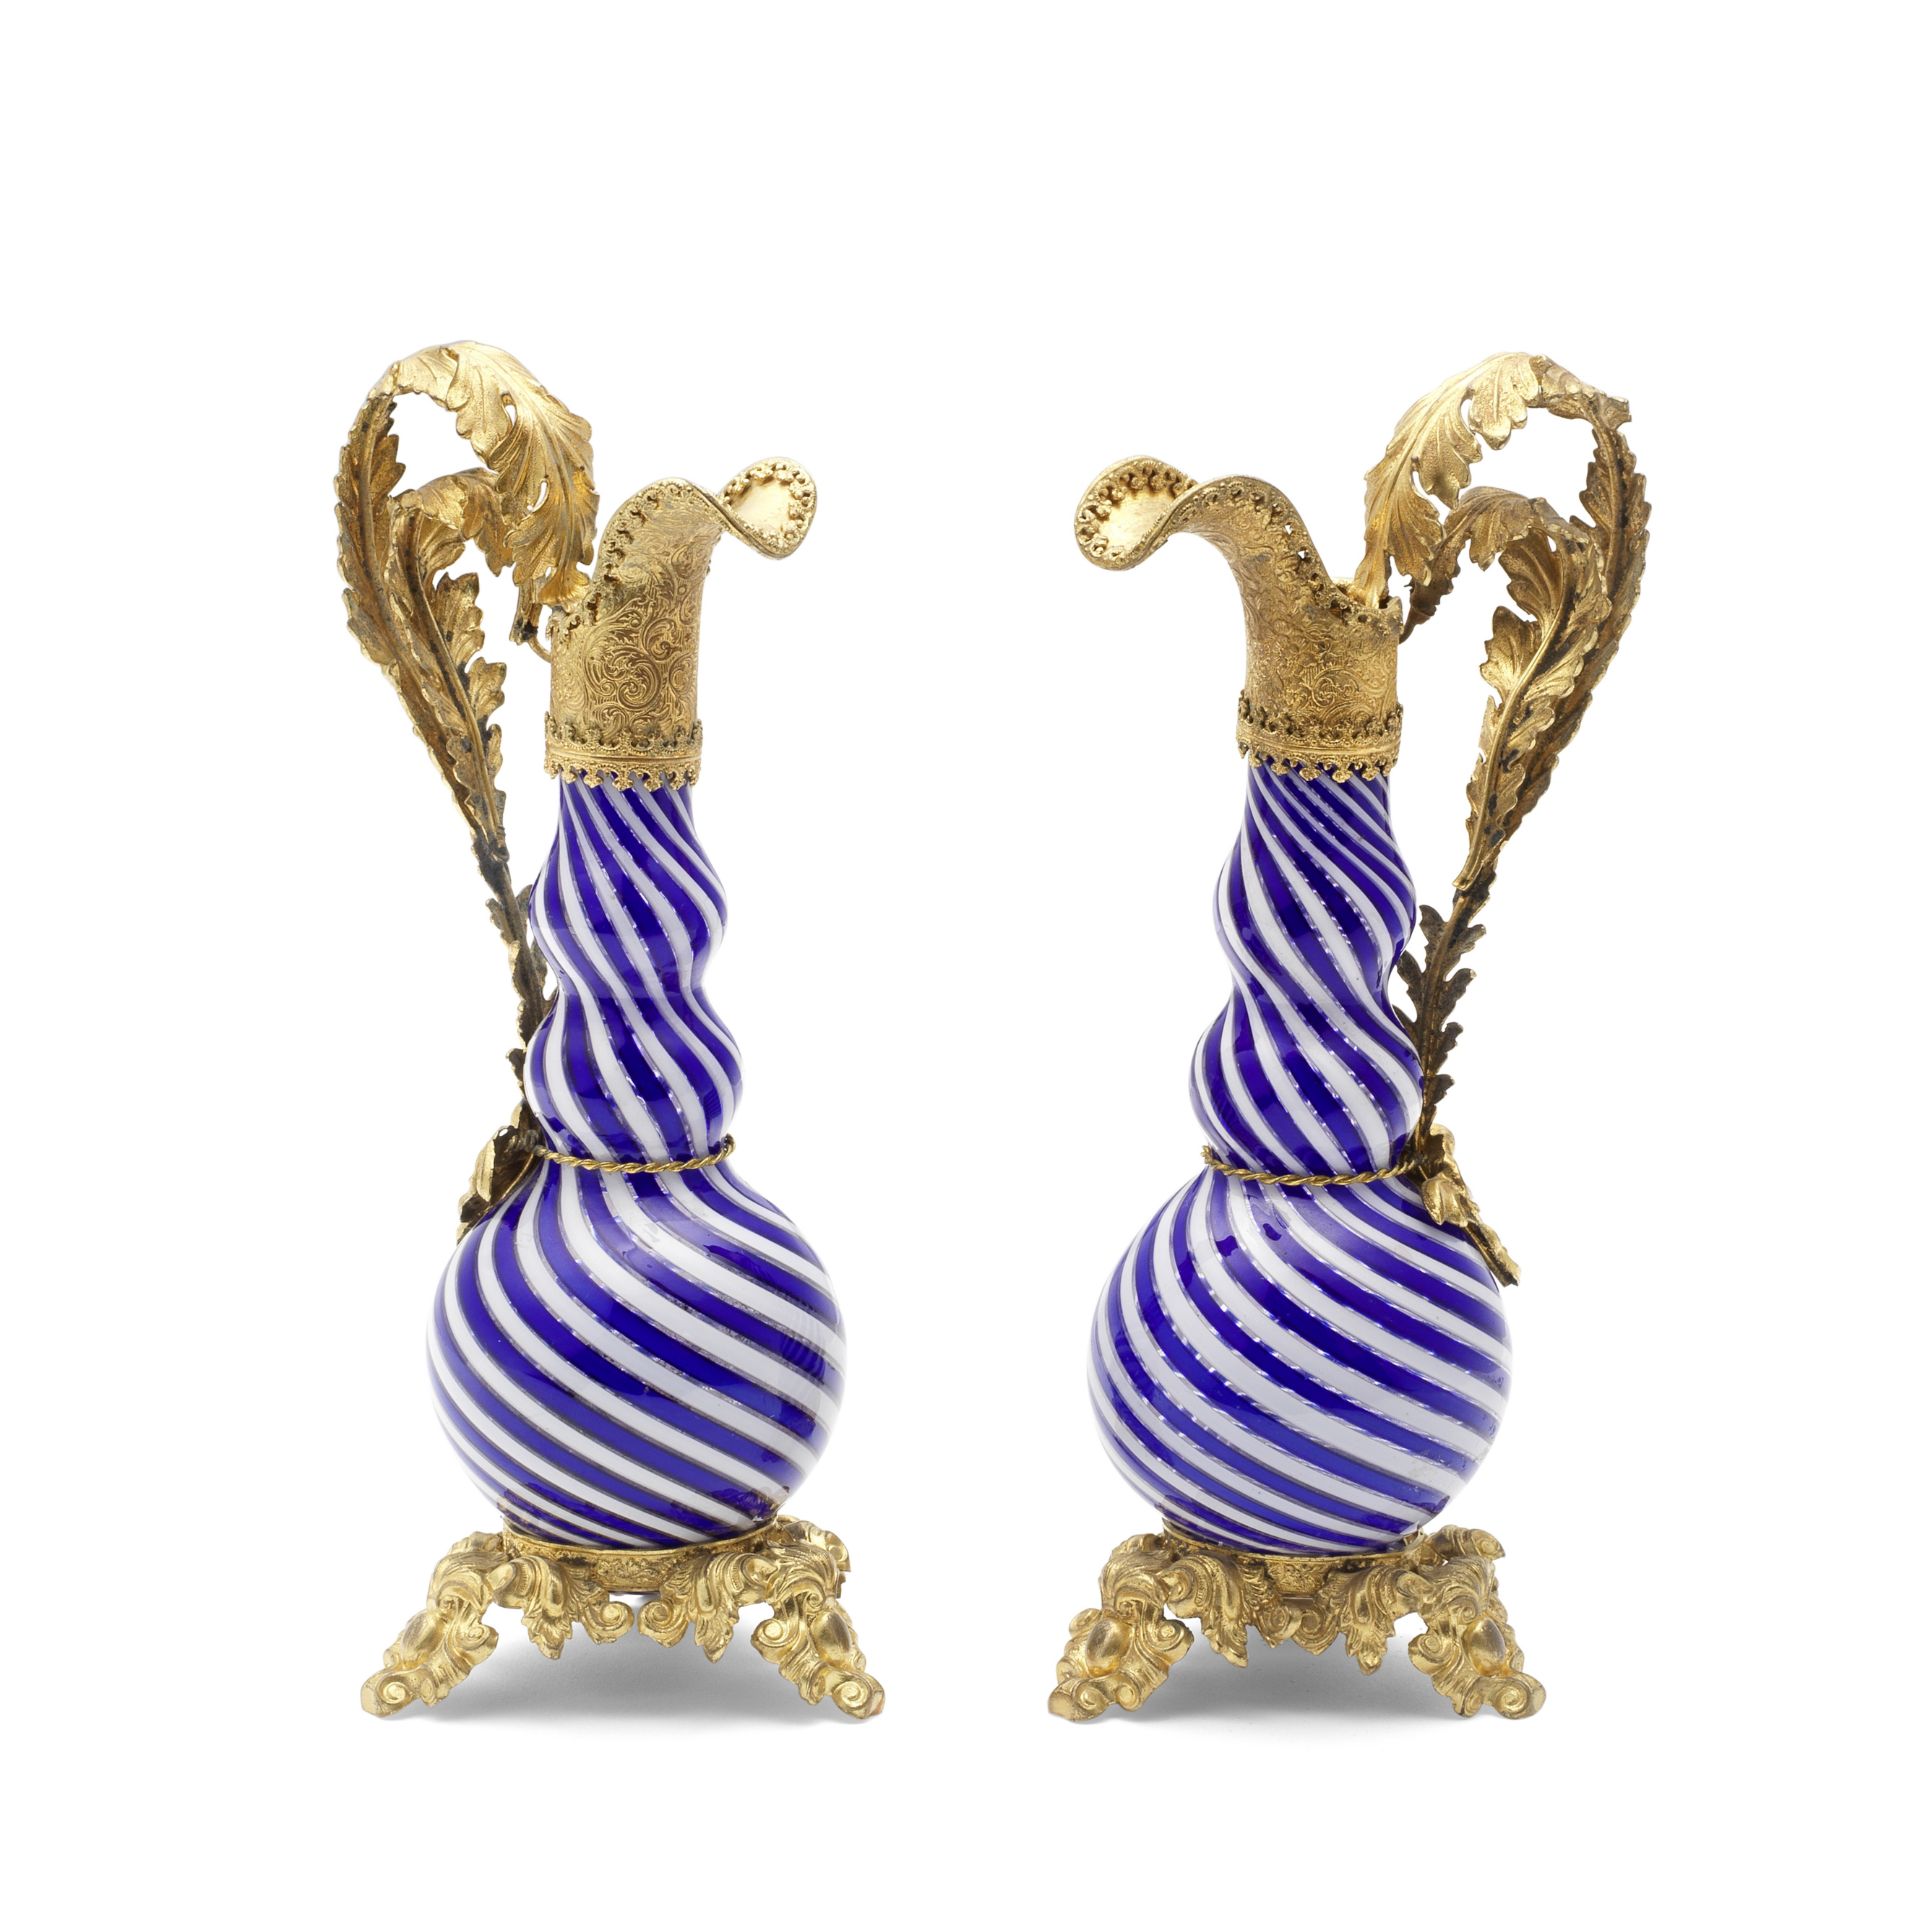 A pair of French gilt metal mounted ewers, late 19th century